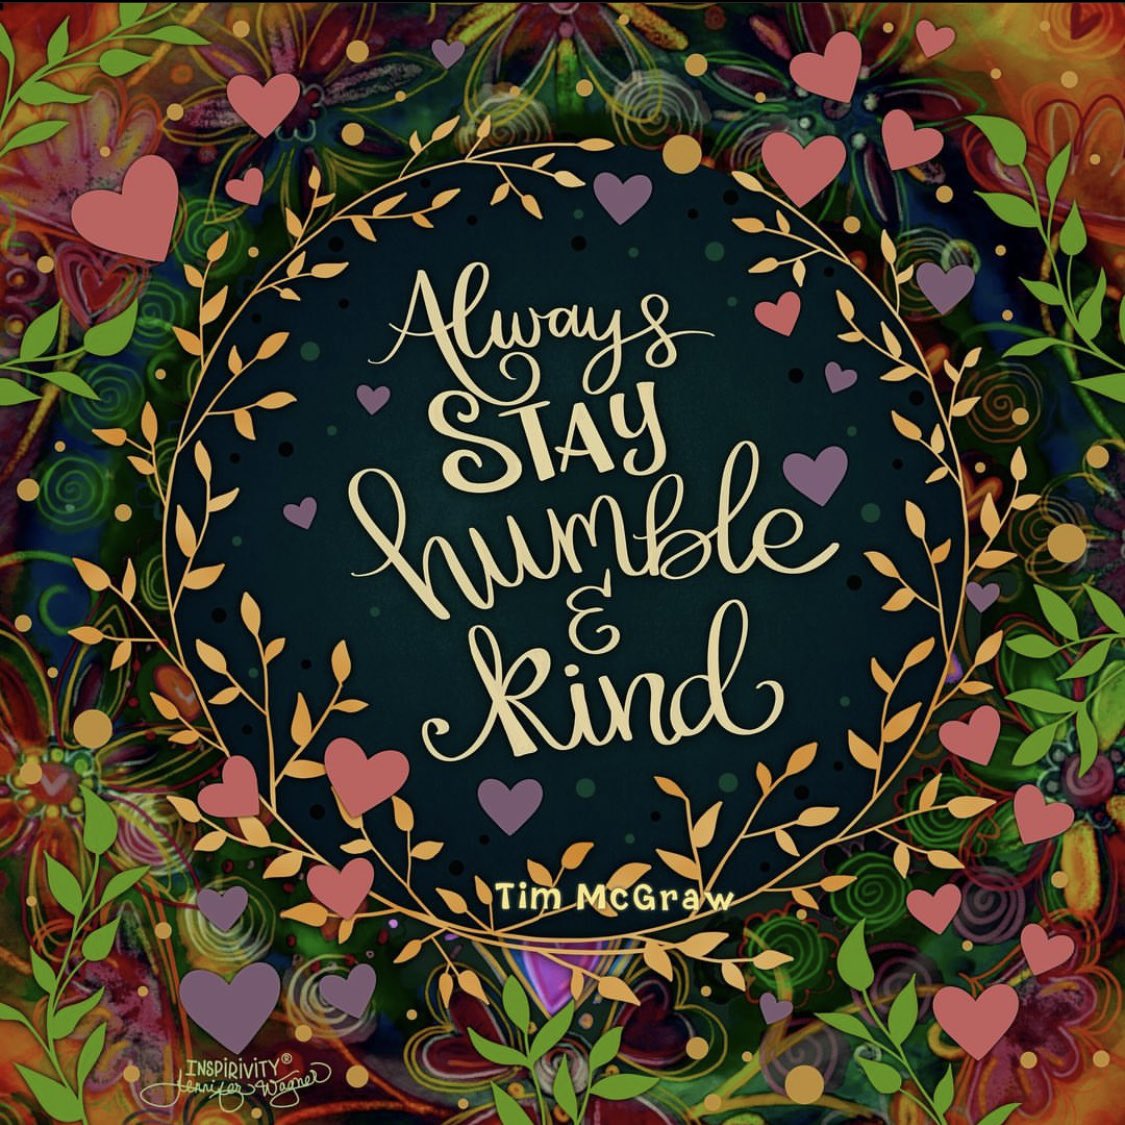 Stay humble and kind. People are dealing with stuff that may not be visible Image: instagram.com/inspirivity